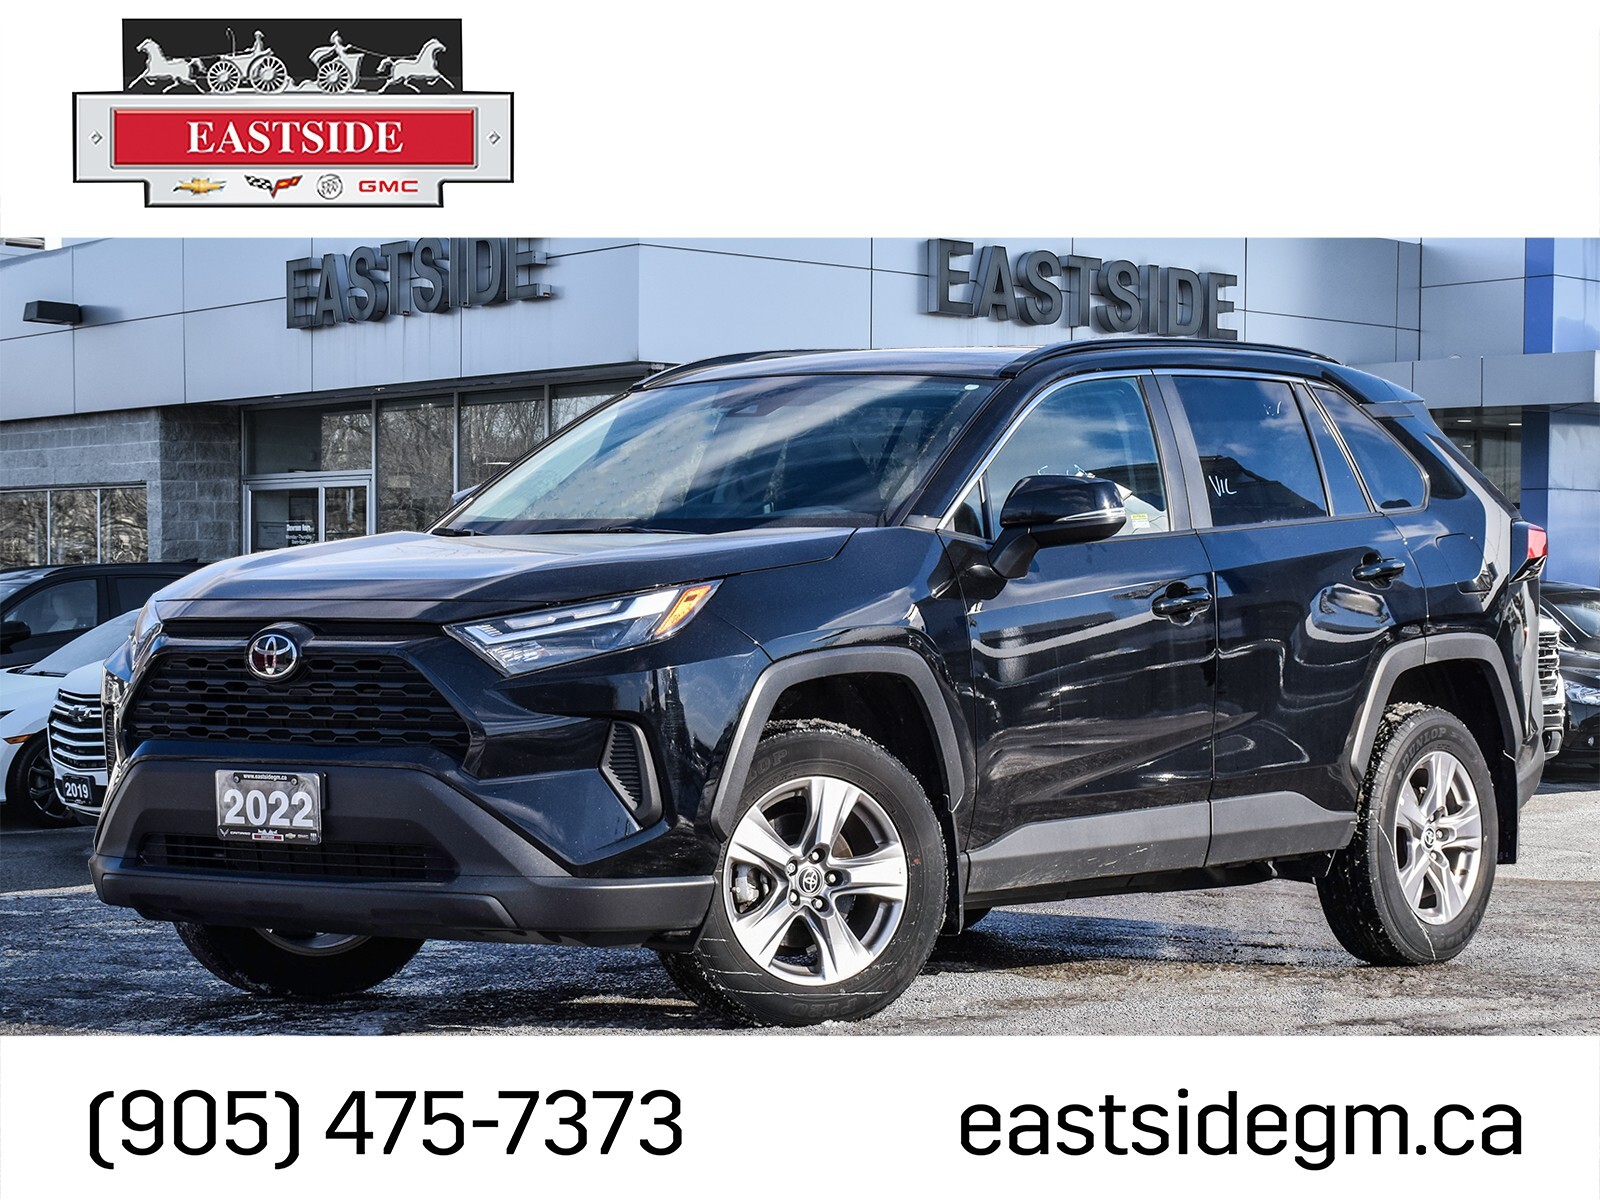 2022 Toyota RAV4 Clean Carfax|Well Maintained|Sunroof|Alloy Rims